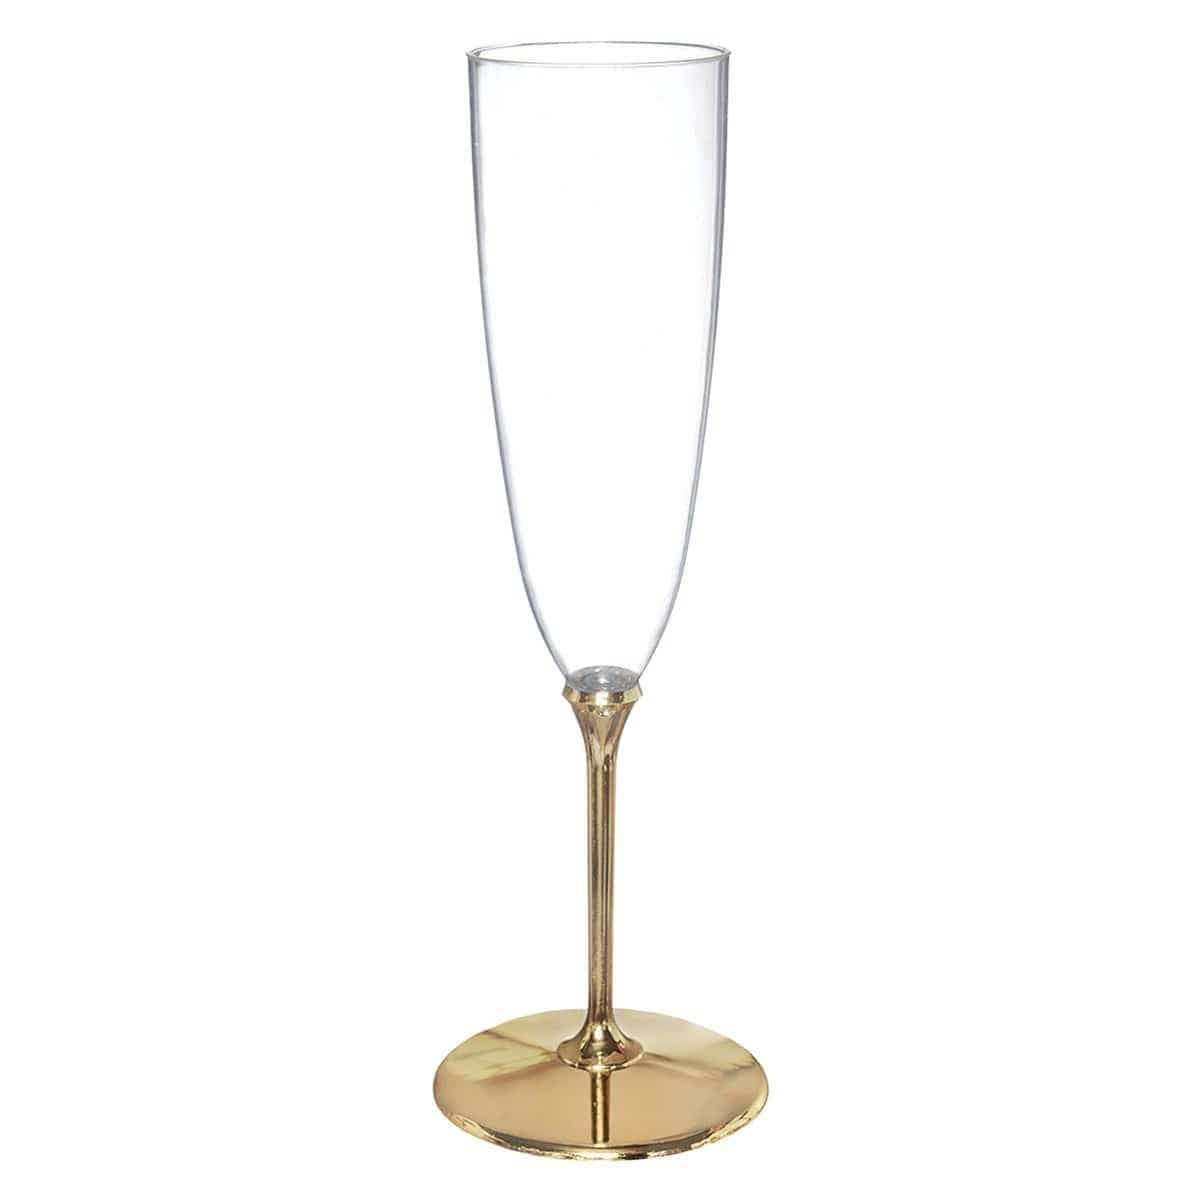 Buy Plasticware Metallic Gold Champagne Glasses, 8 Counts sold at Party Expert